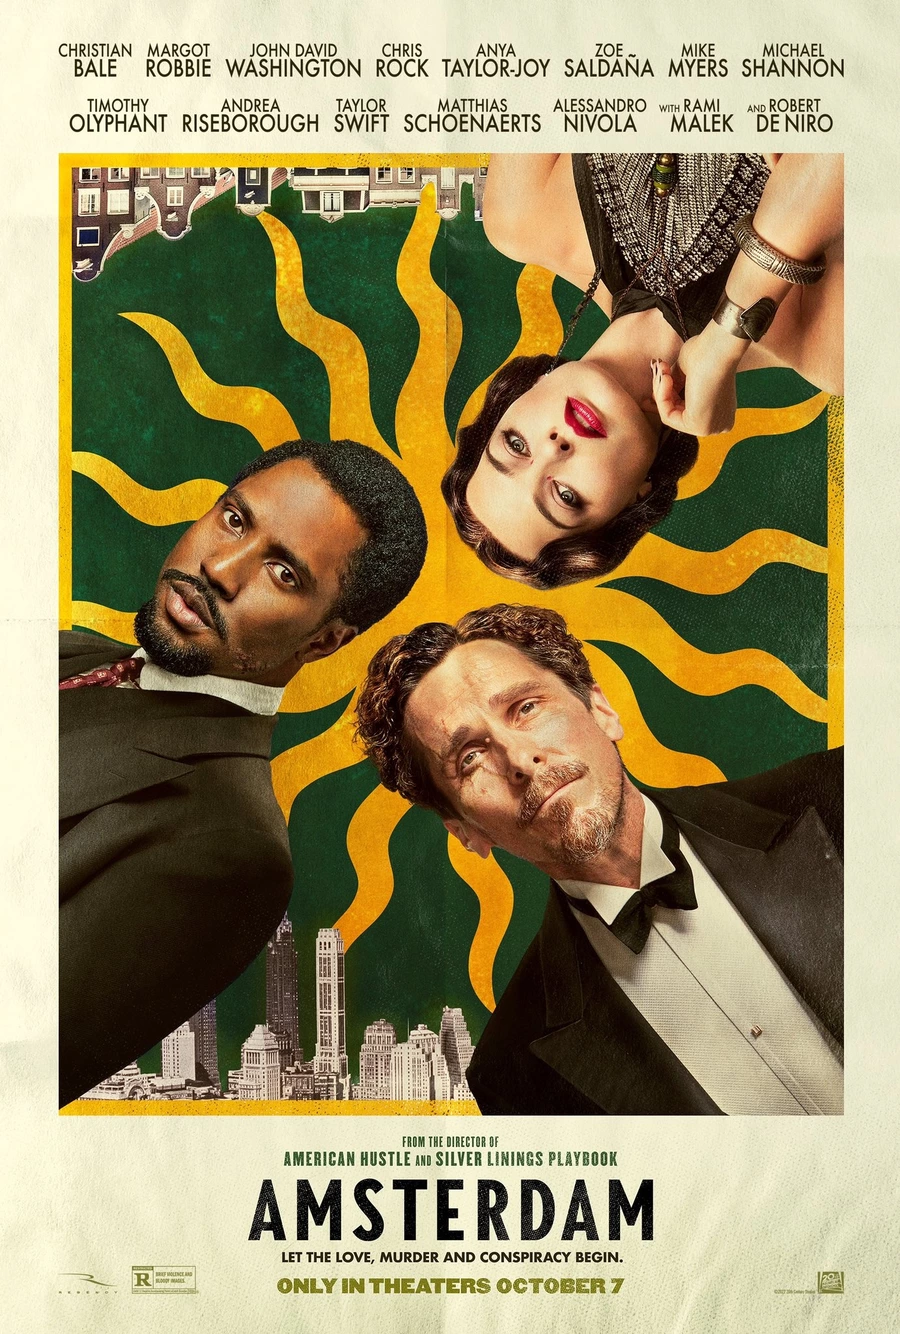 Yesterday the online premiere of David O. Russell's new film «Amsterdam», a crime drama starring Christian Bale, Margot Robbie and John David Washington, took place.. The events of the film unfold in the 1930s. This is a story about three friends who become witnesses to a murder and suspects and uncover one of the most insane conspiracies in US history.

In minor roles: Chris Rock, Anya Taylor-Joy, Robert De Niro, Rami Malek, Zoe Saldaña, Mike Myers, Taylor Swift, Michael Shannon, Timothy Olyphant, Andrea Riseborough, Matthias Schoenaerts and Alessandro Nivola.